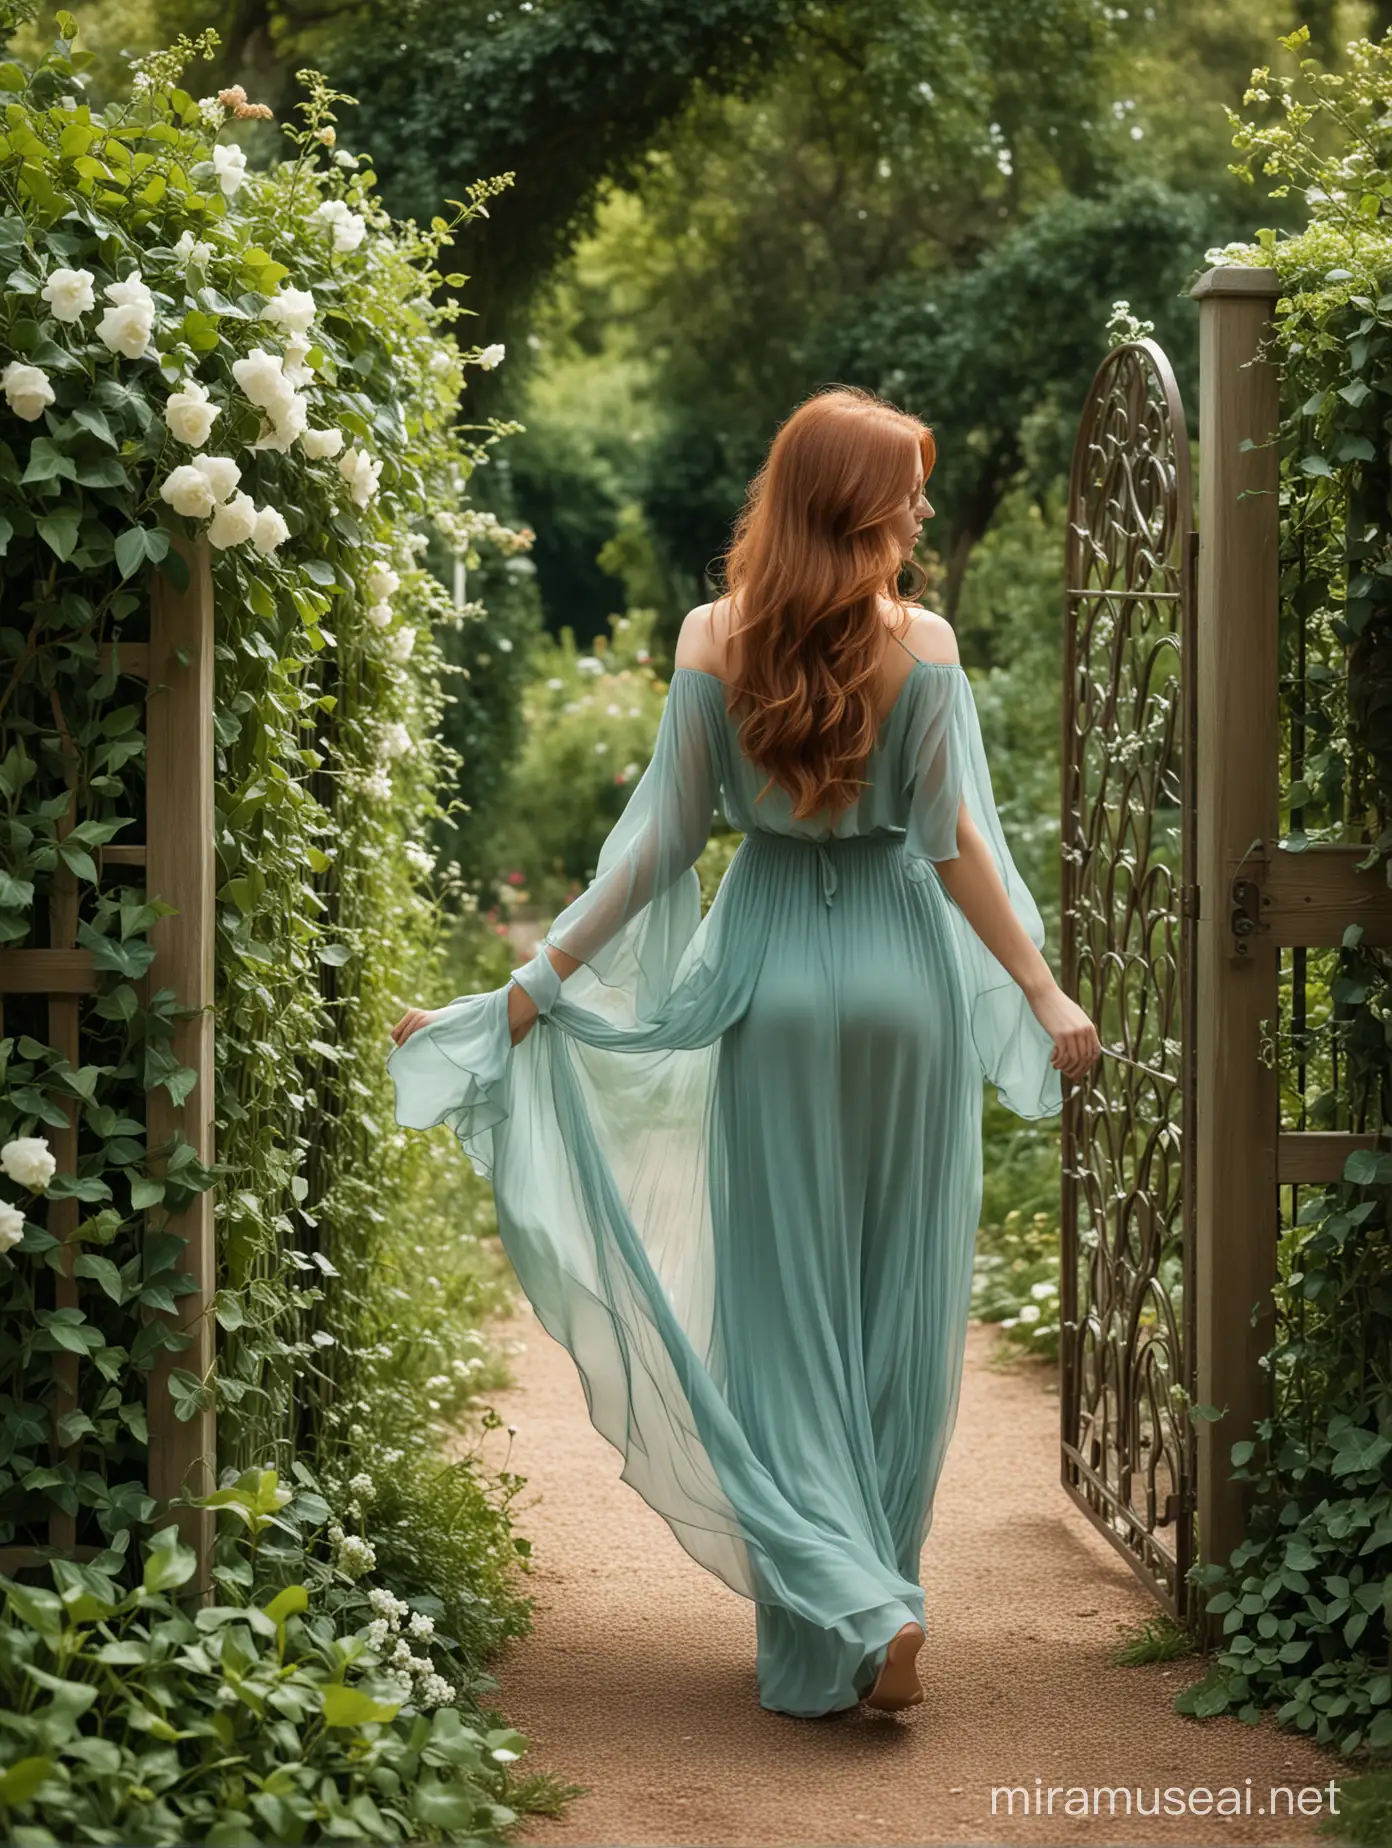 a side view of a young beautiful woman with flowing auburn hair wearing a pale teal chiffon layered flowing long dress, walking through a garden gate into a lush secret garden, with ivy, tall flowers, green trees, wild birds, muted tones